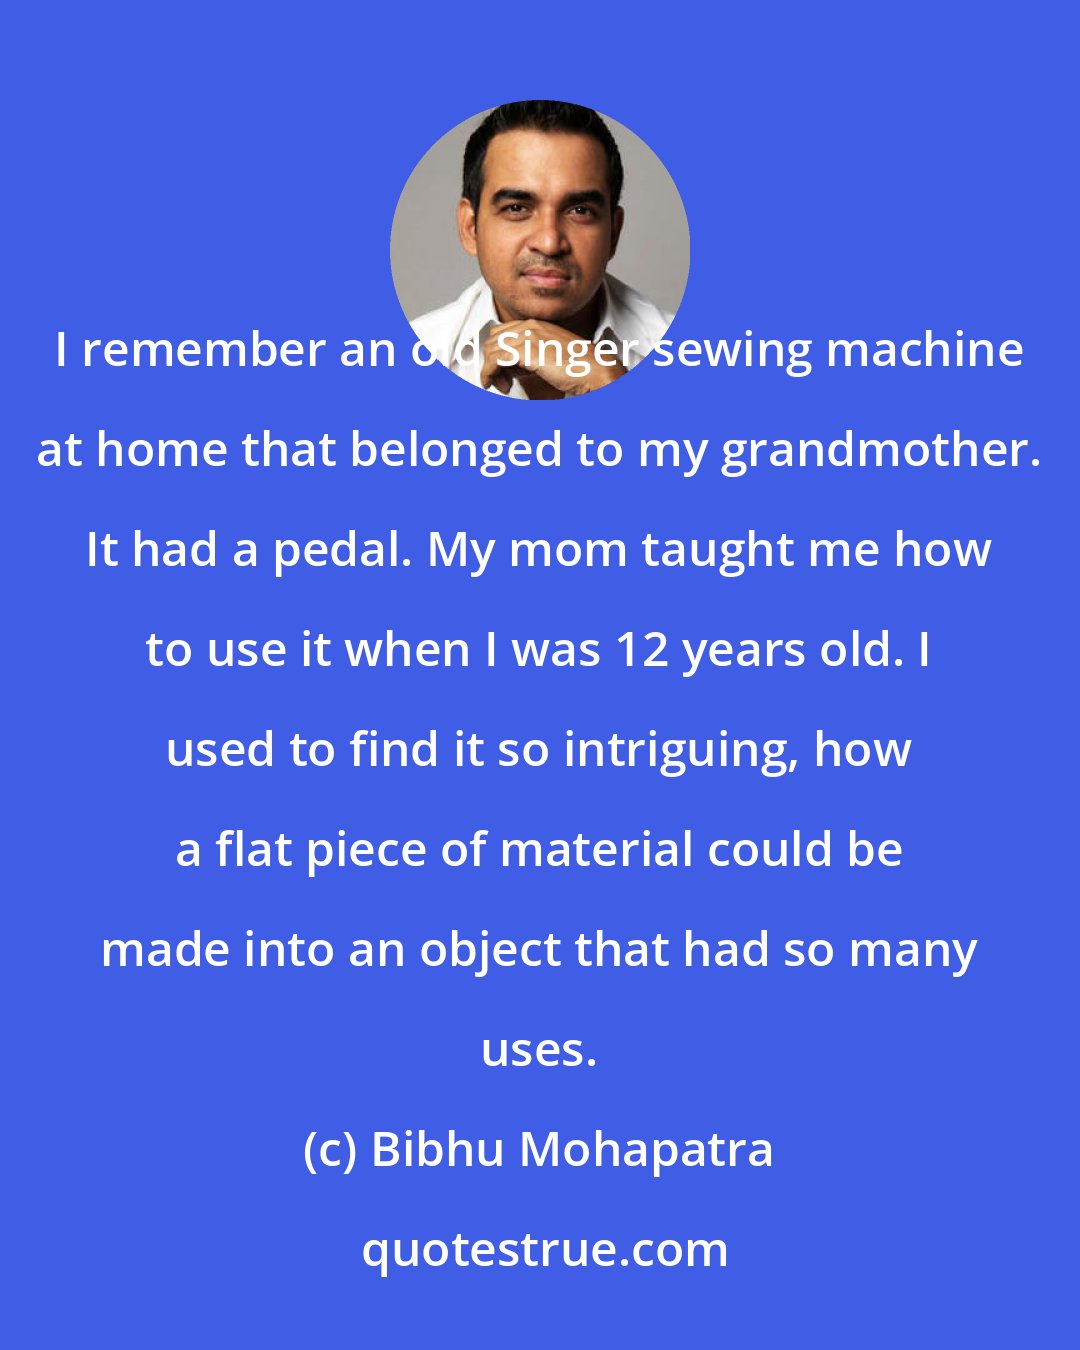 Bibhu Mohapatra: I remember an old Singer sewing machine at home that belonged to my grandmother. It had a pedal. My mom taught me how to use it when I was 12 years old. I used to find it so intriguing, how a flat piece of material could be made into an object that had so many uses.